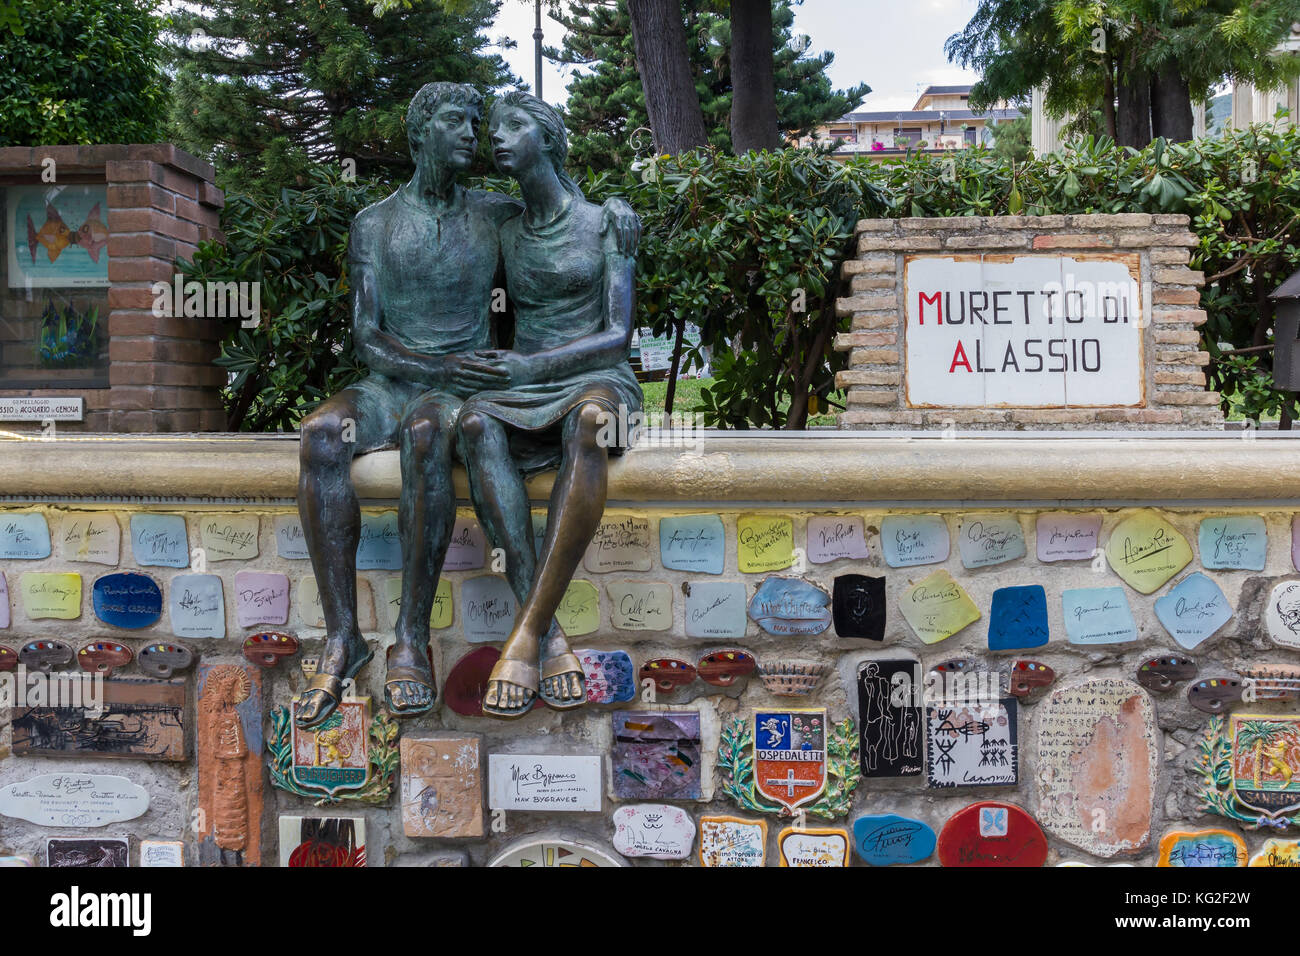 Alassio (SV), ITALY - August 22, 2017: 'Muretto di Alassio', the famous Little Wall in Alassio with the bronze statue of the lovers. Stock Photo